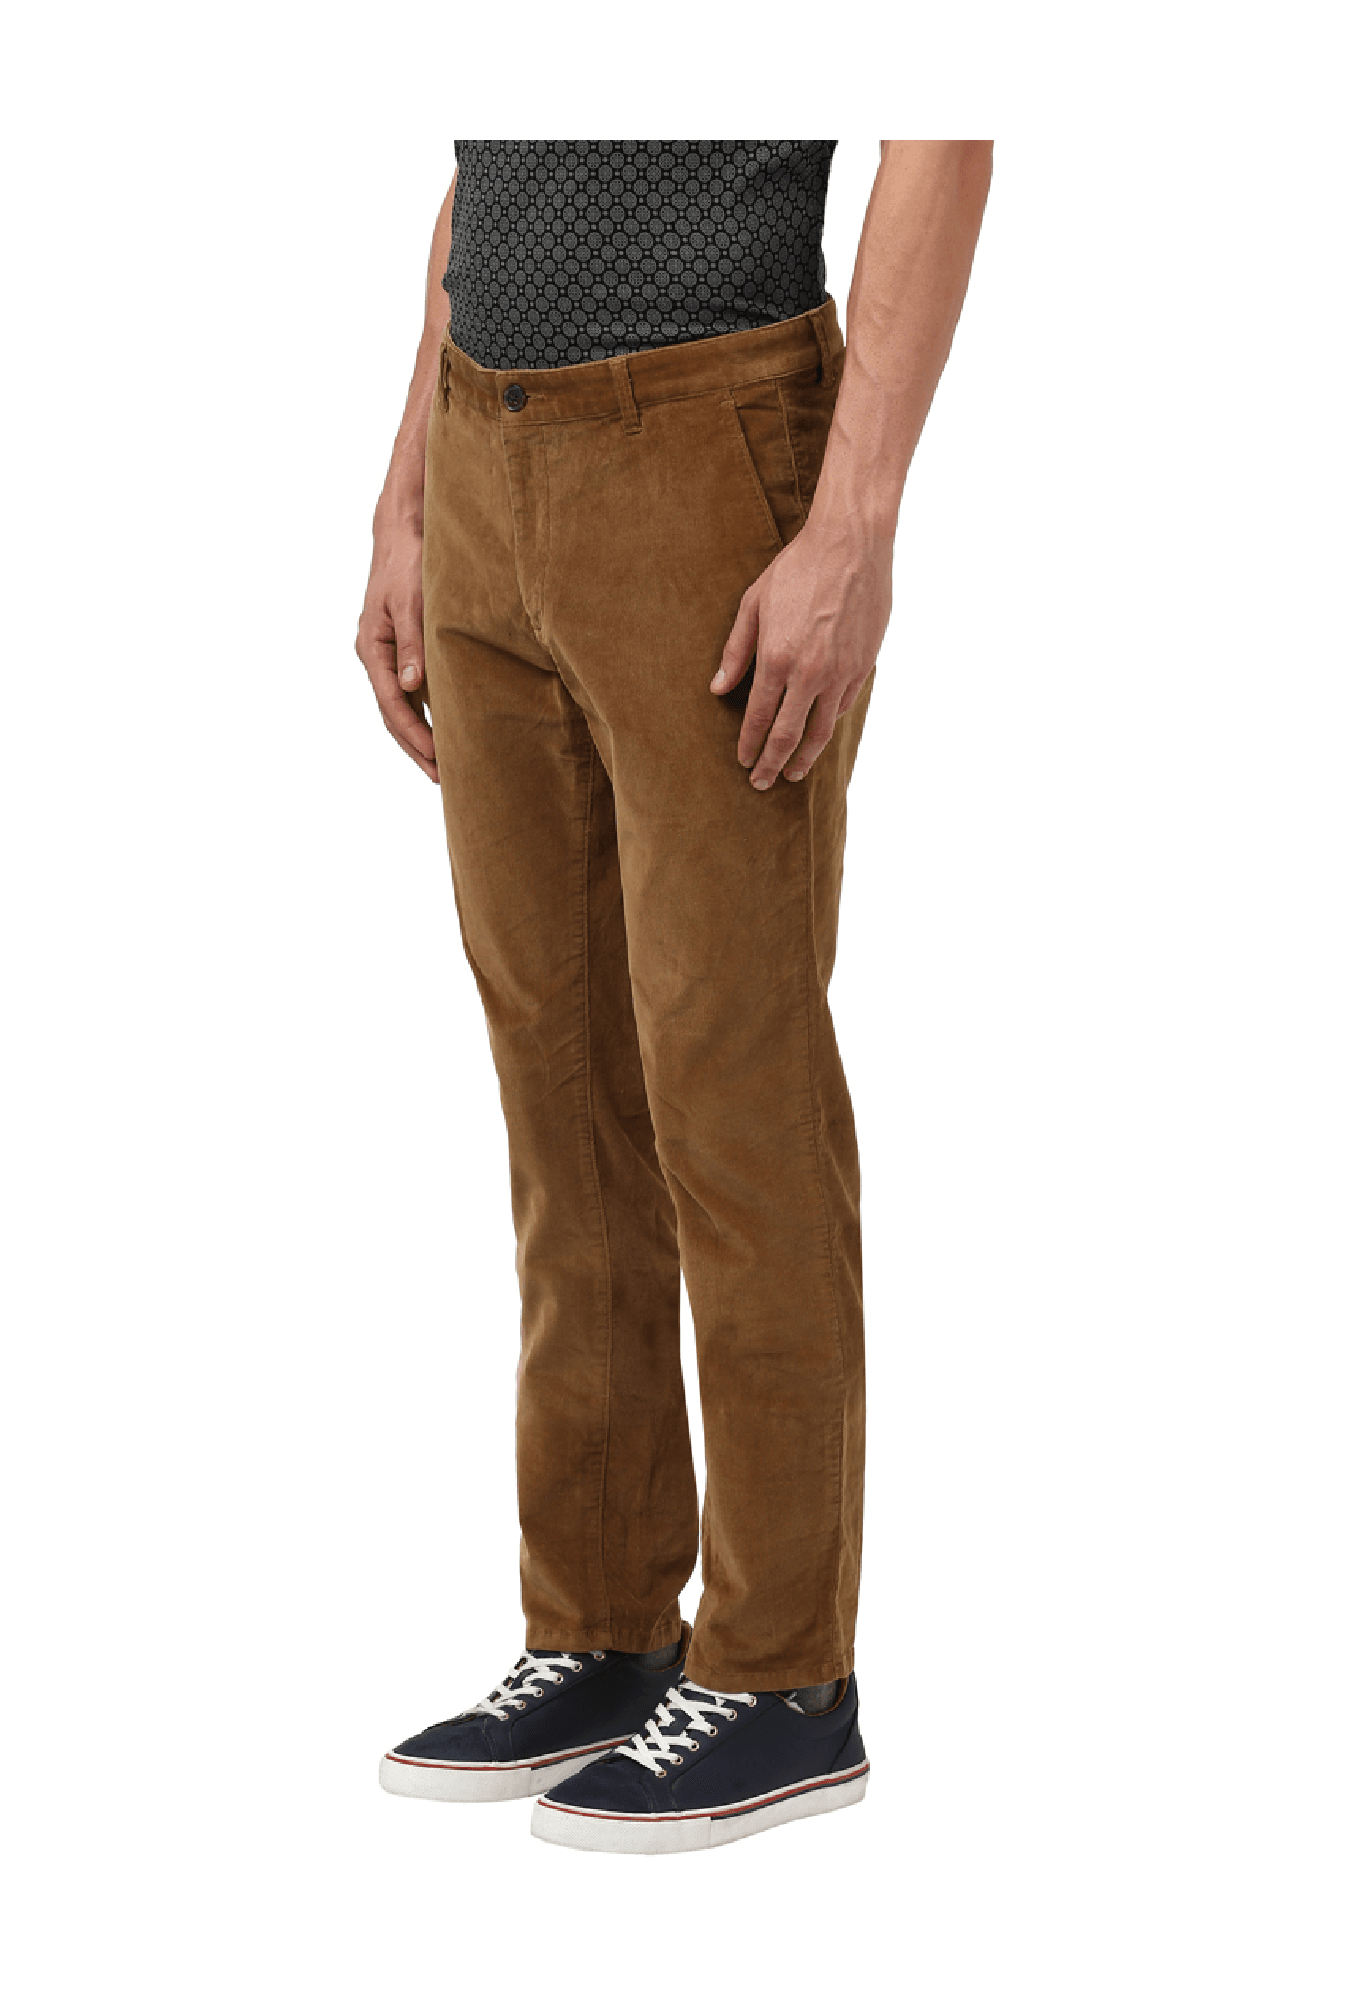 Buy Brown Trousers & Pants for Men by Xint Online | Ajio.com